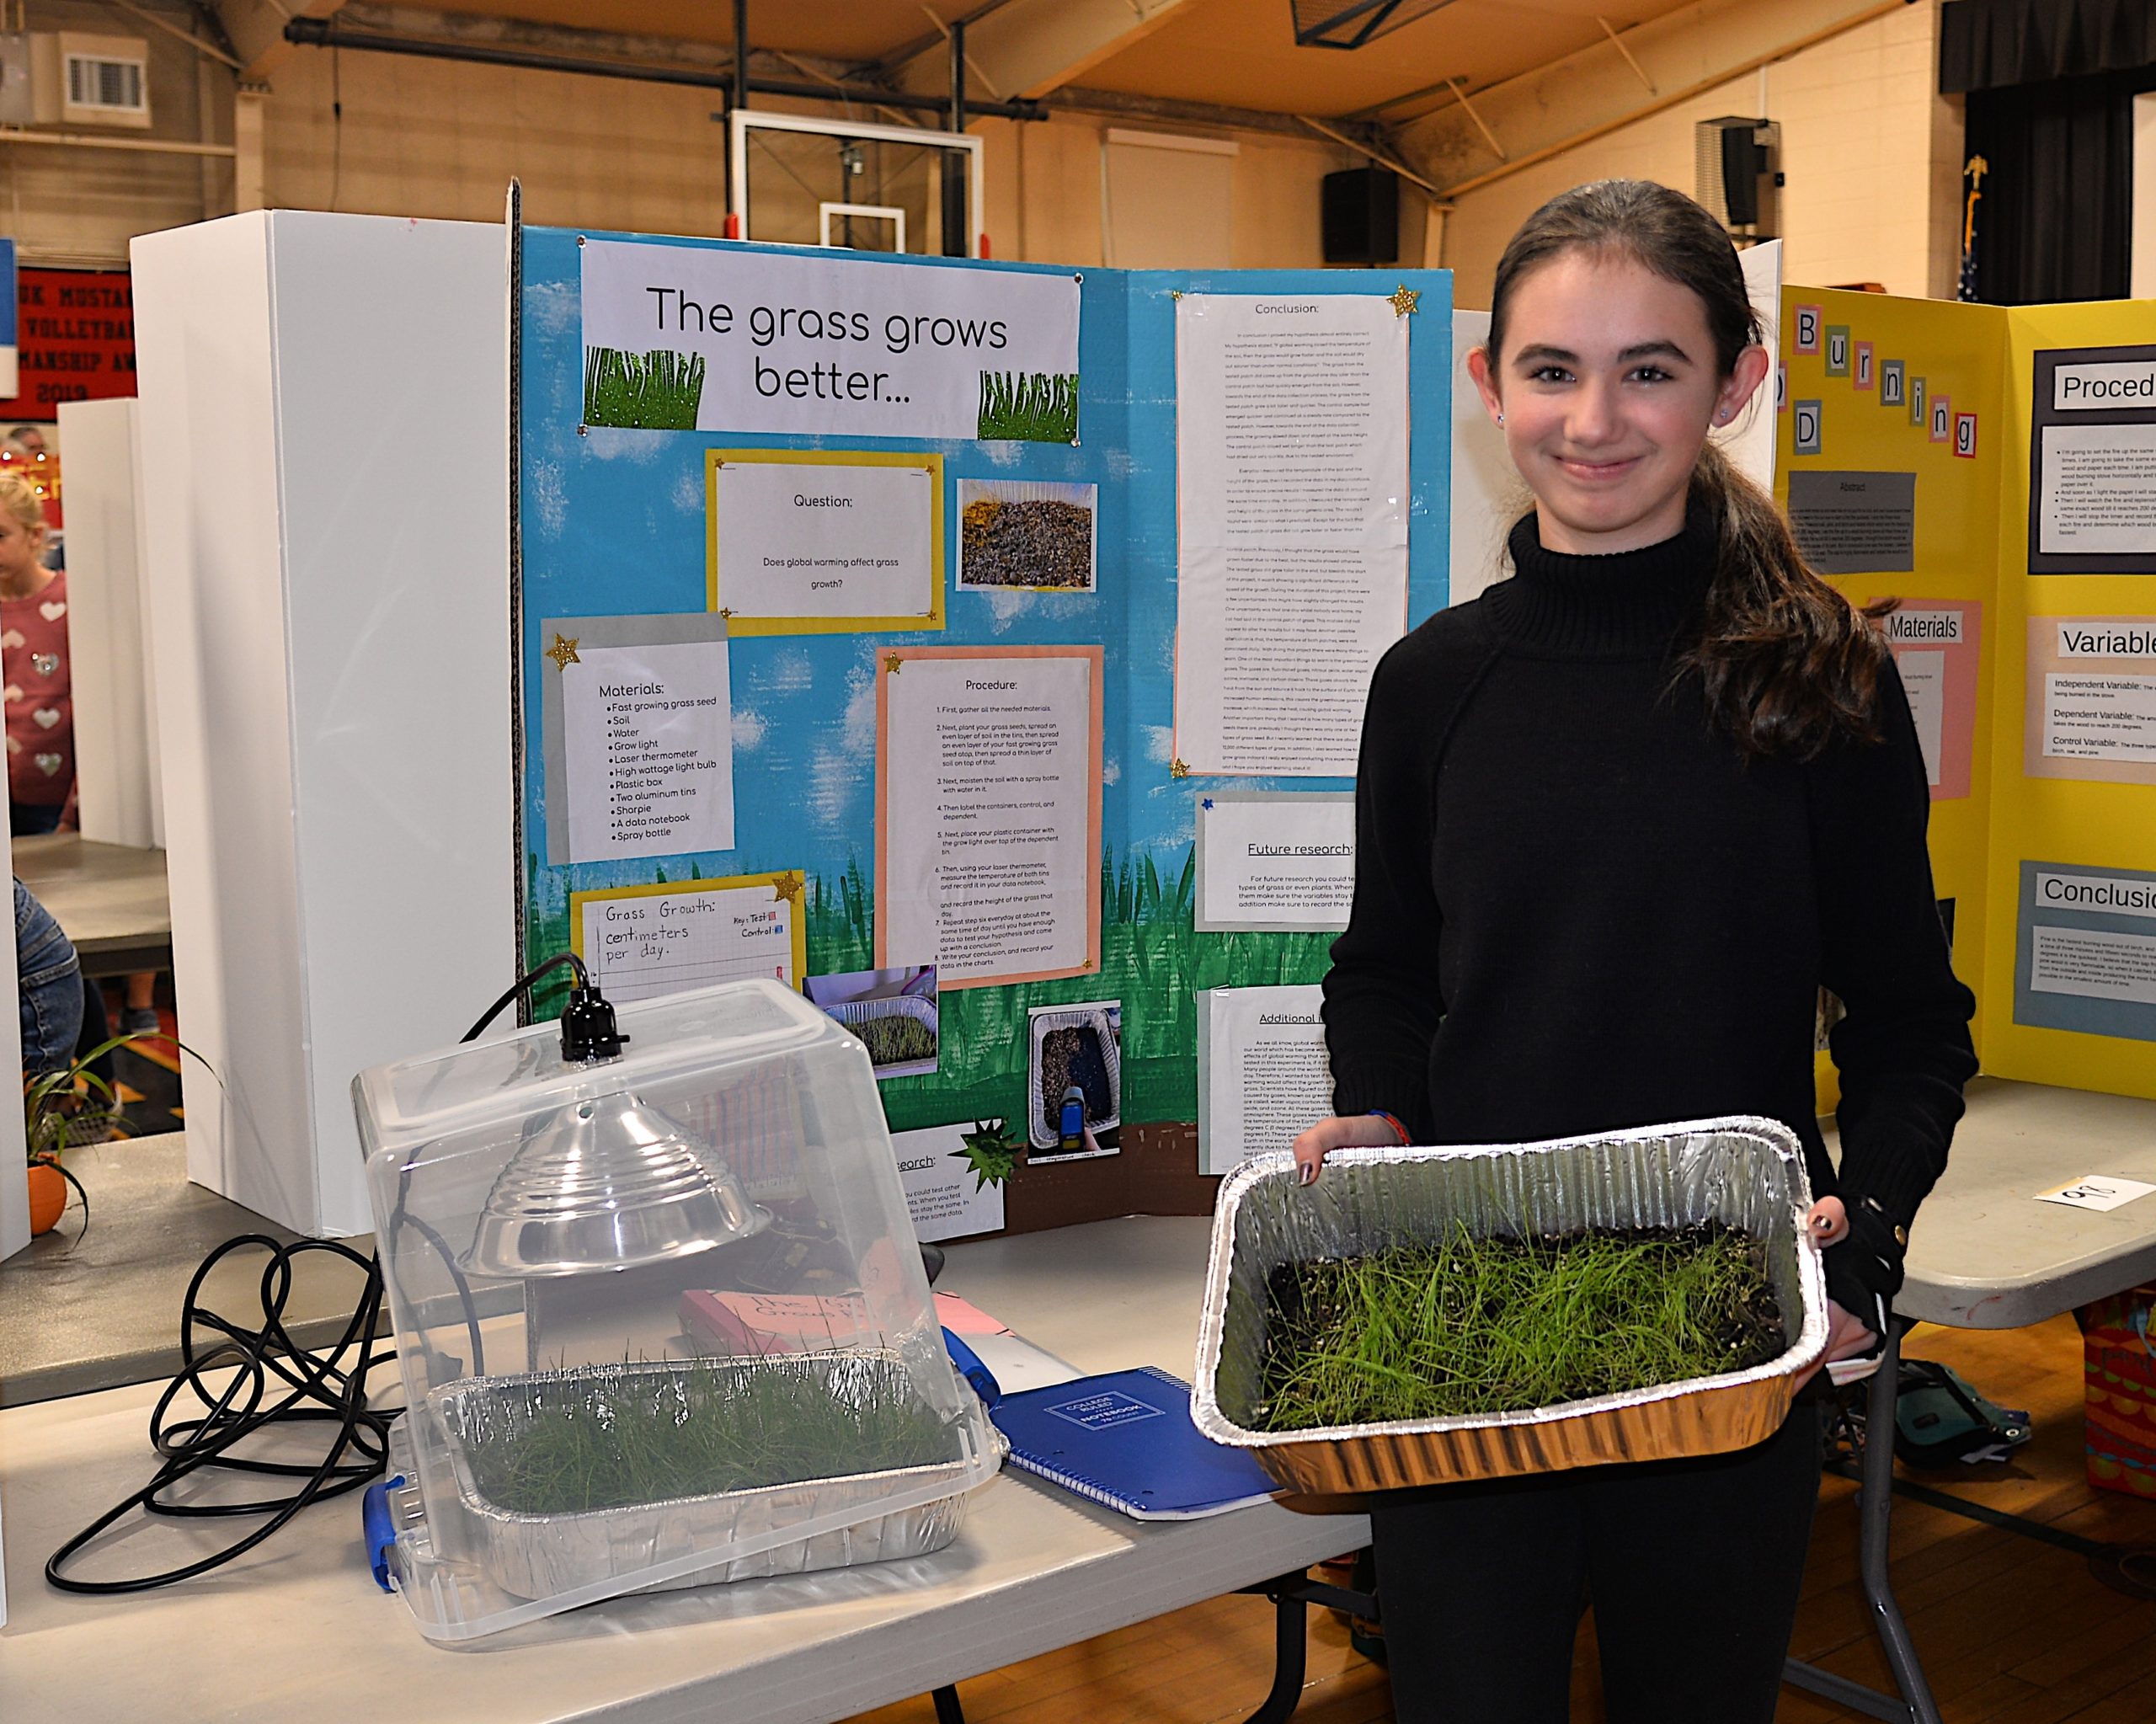 Montauk School and the Concerned Citizens of Montauk partnered for the annual Montauk School Science Fair on Friday. Nina King’s studied the effects of a warming climate on the growth rate of grass. KYRIL BROMLEY